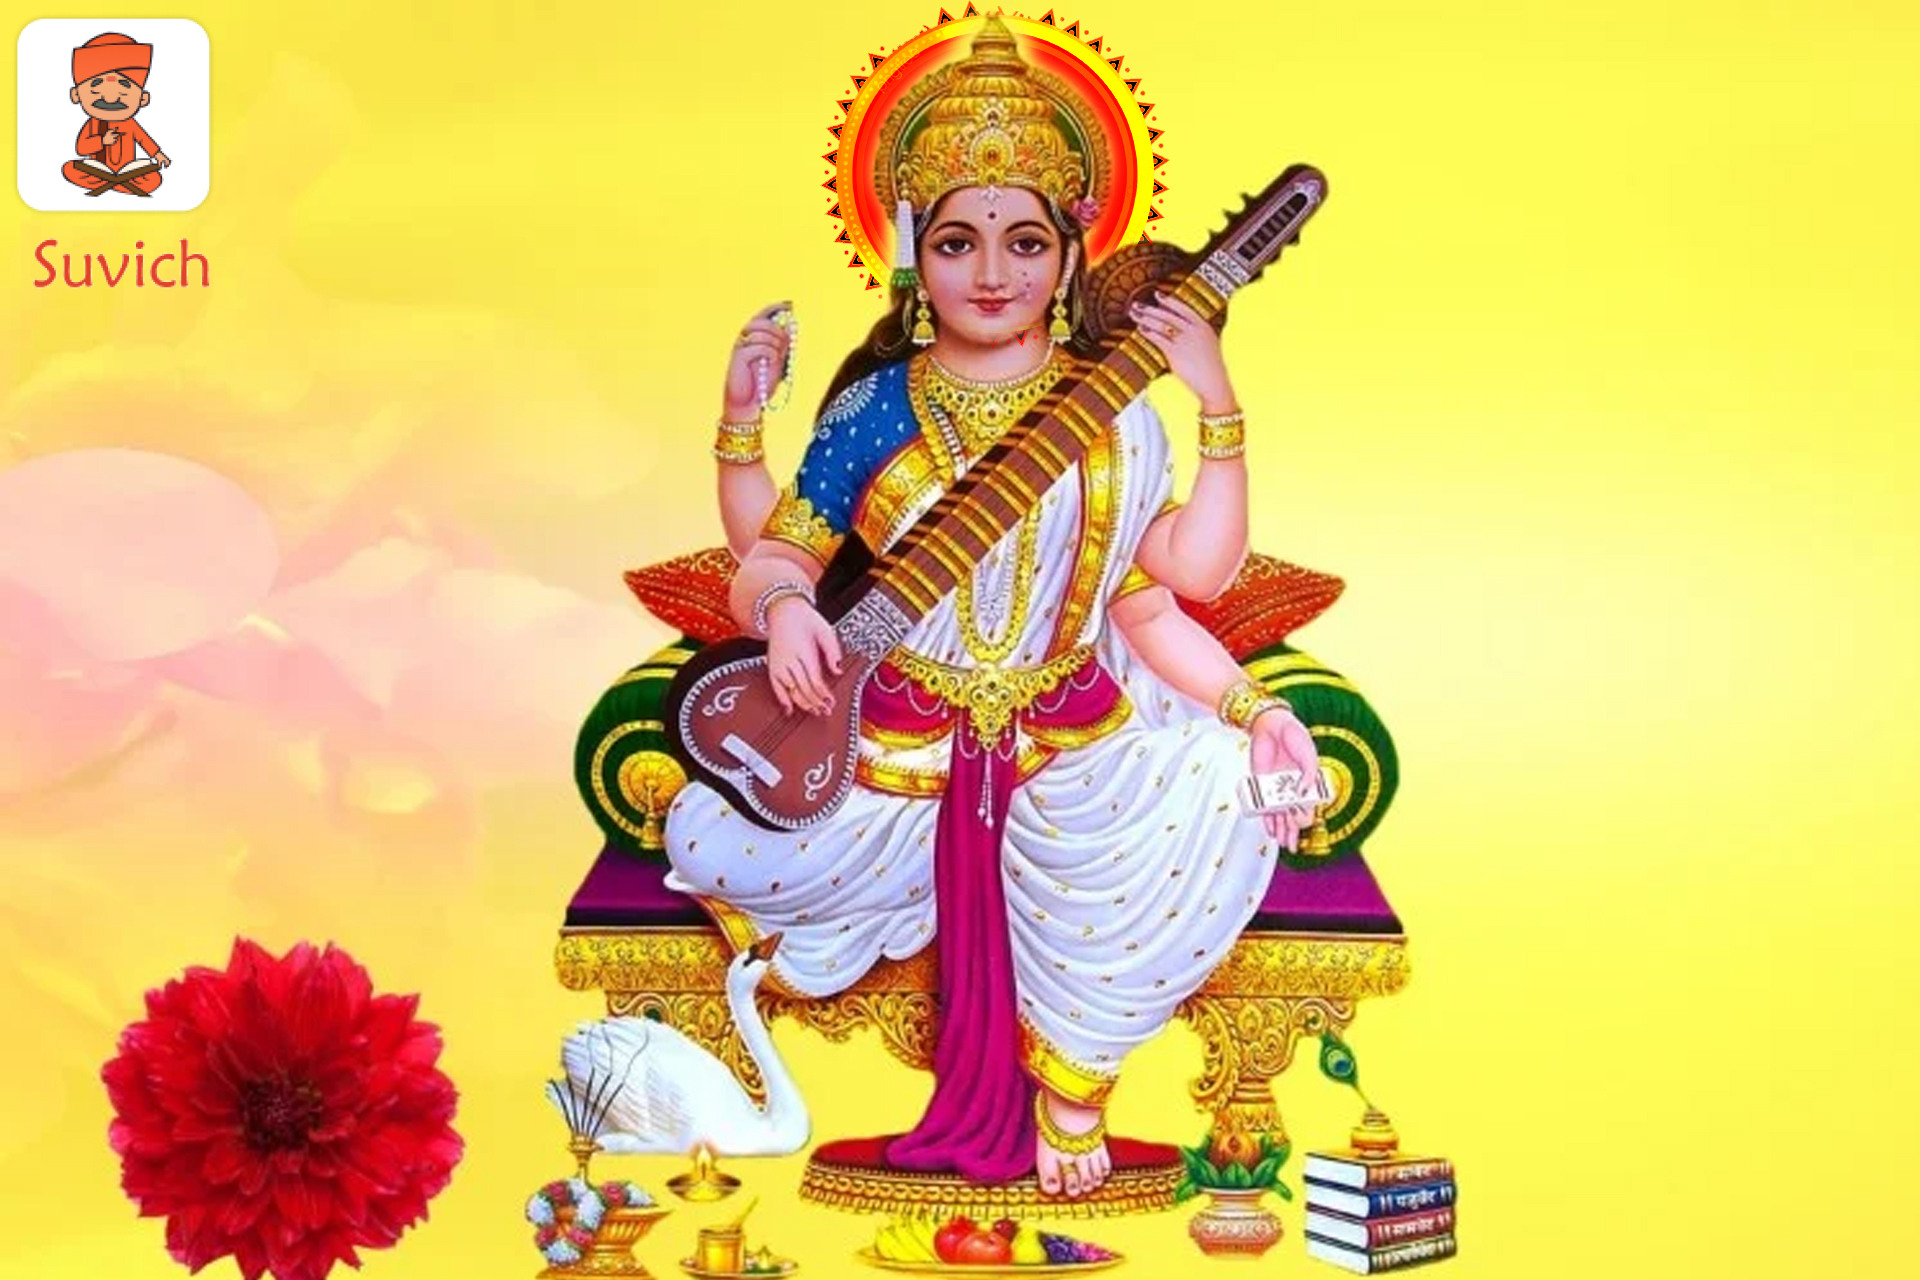 Basant Panchami 2022: When Is The Auspicious Time Of Basant Panchami? Know What To Do Or Not On This Day